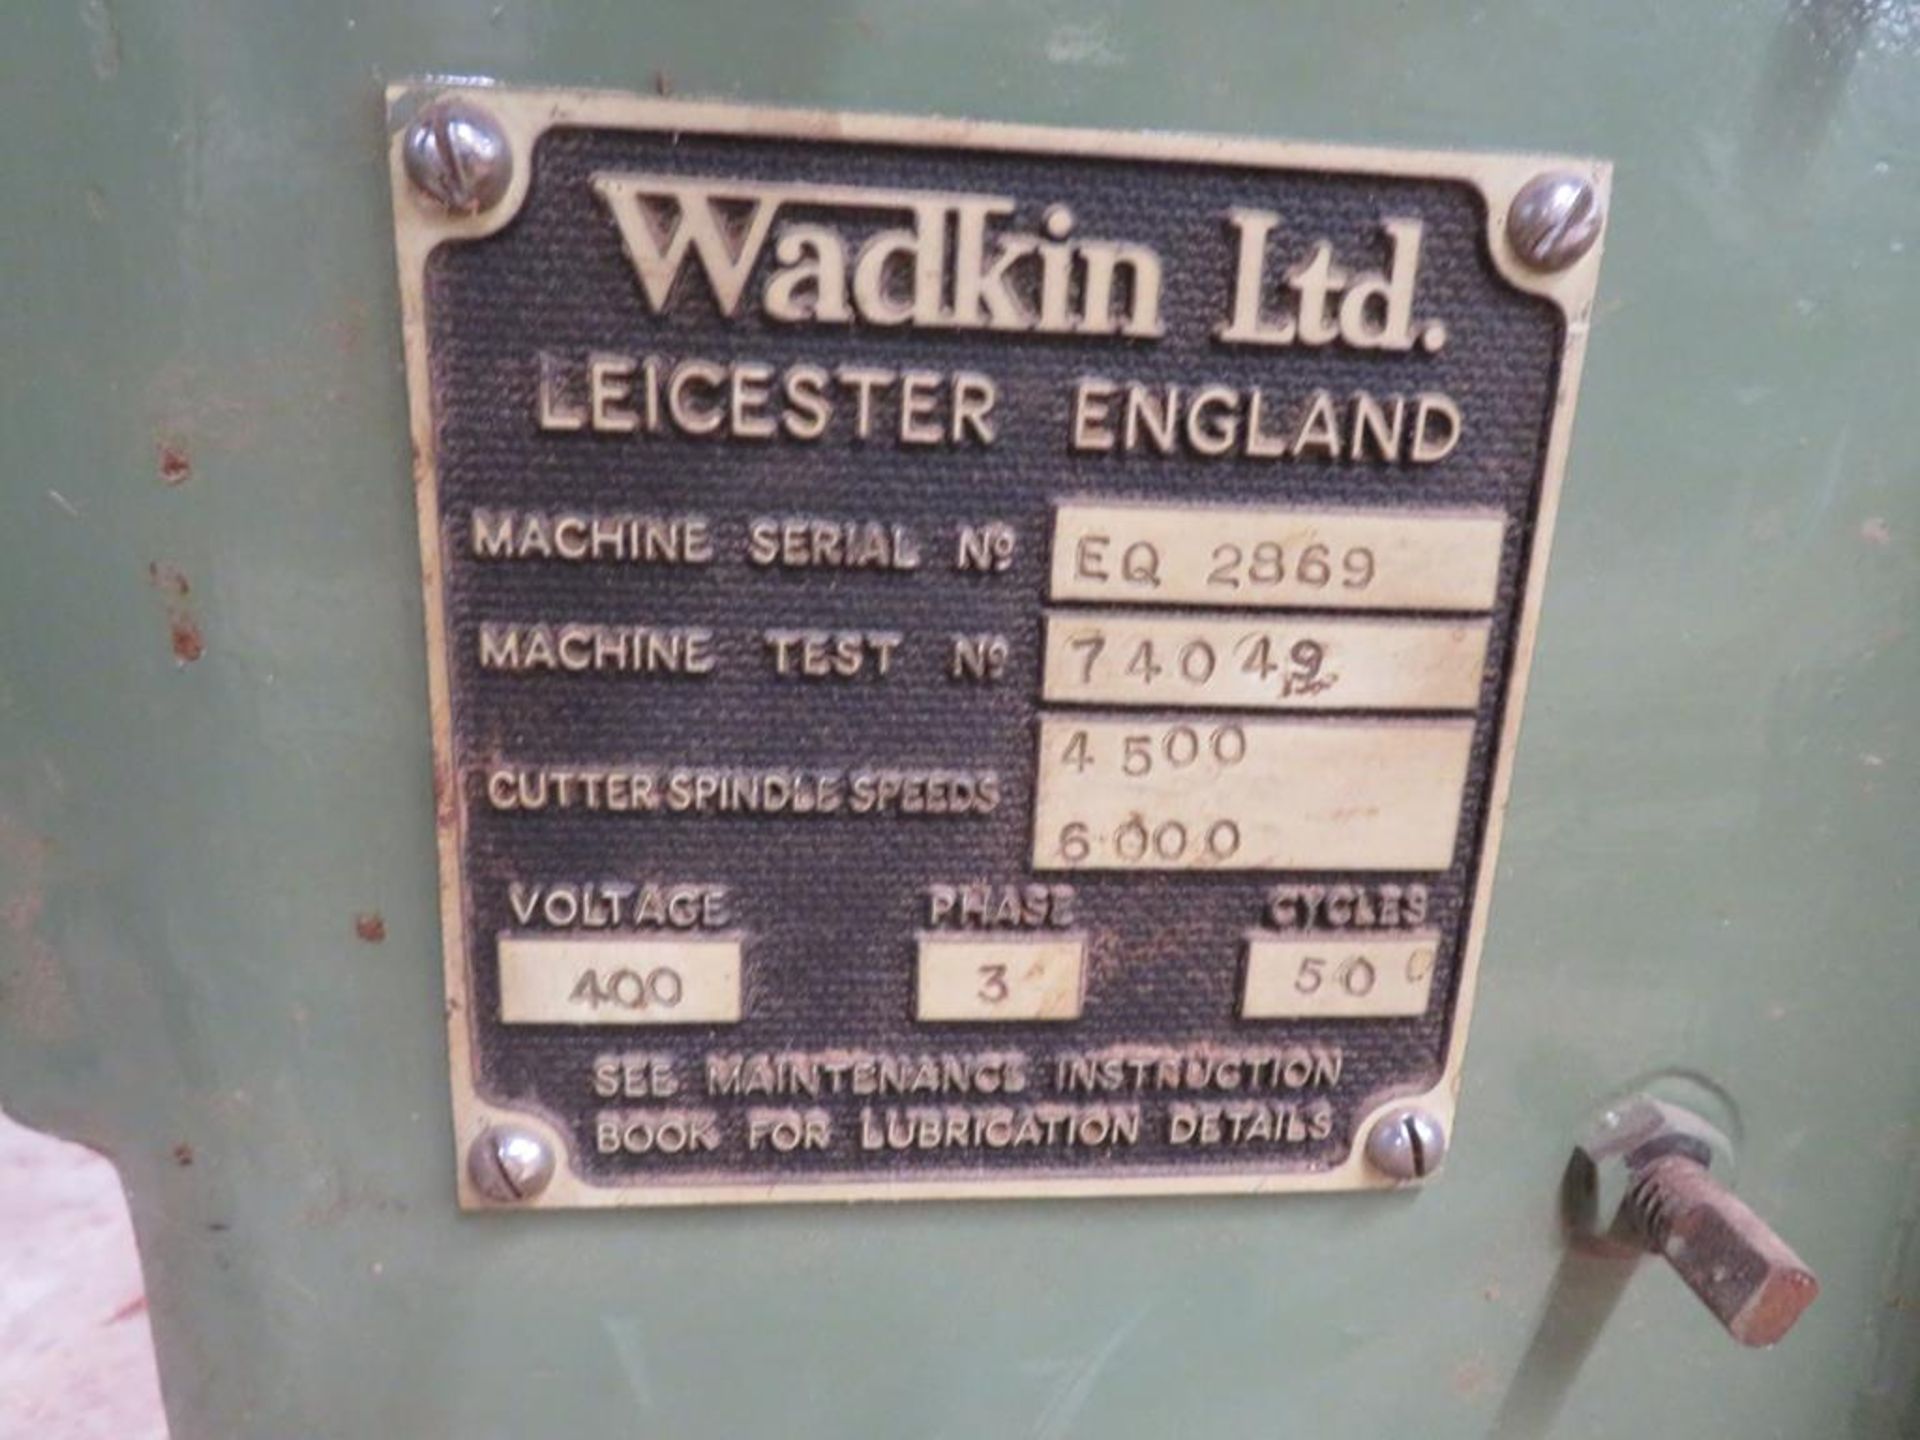 Wadkin EQ 2869 Spindle Moulder with Wadkin BLG-8 Power Feed - Image 7 of 10